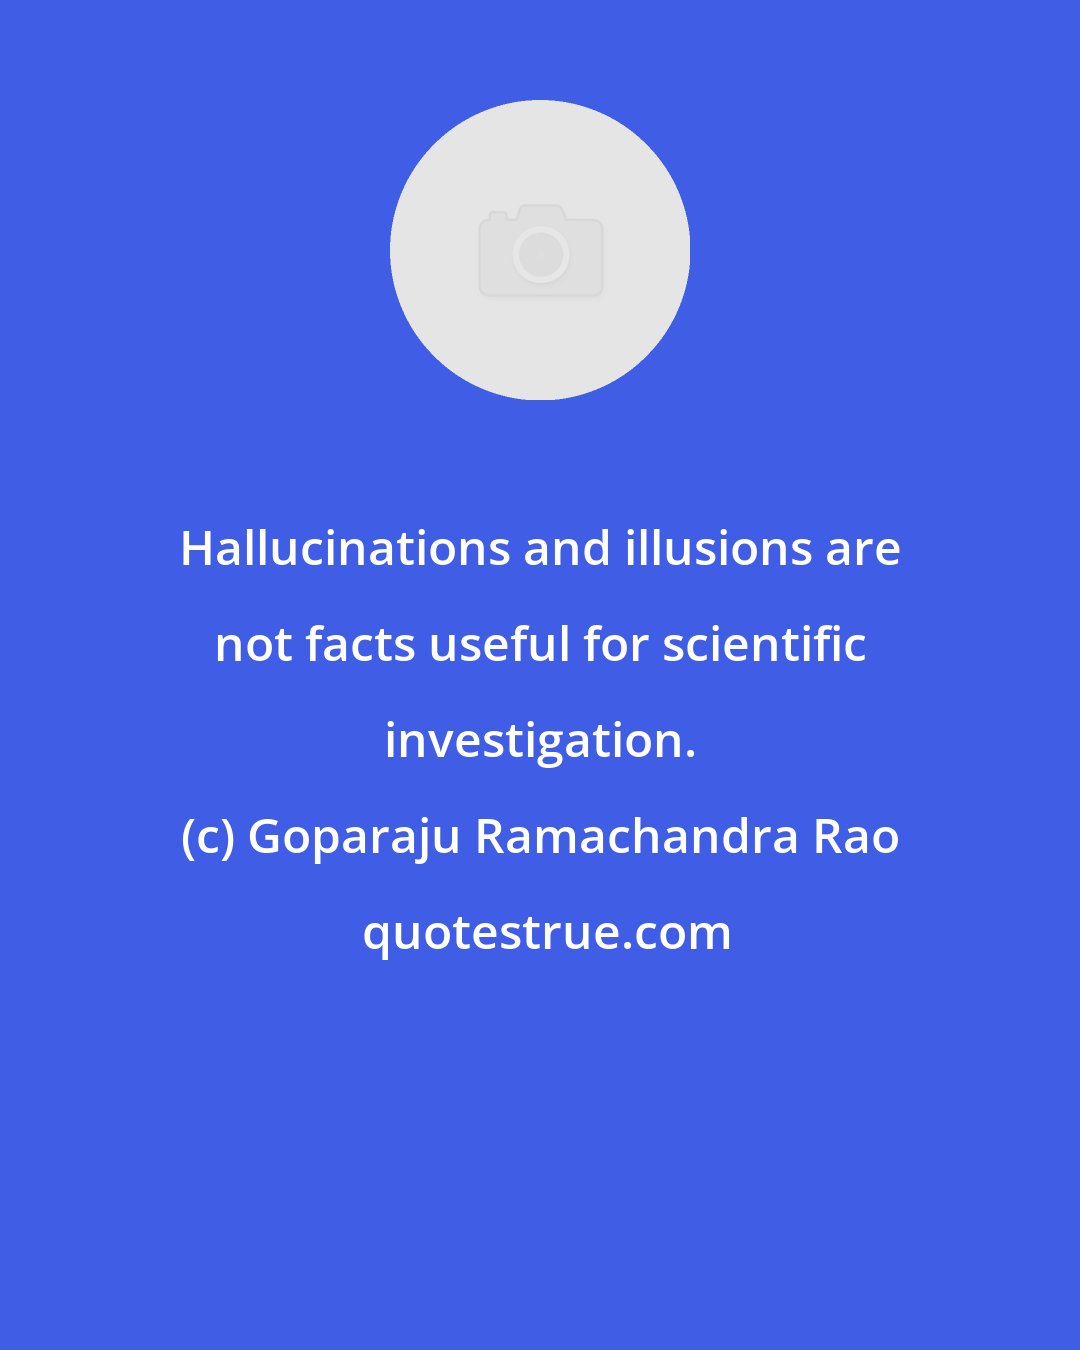 Goparaju Ramachandra Rao: Hallucinations and illusions are not facts useful for scientific investigation.